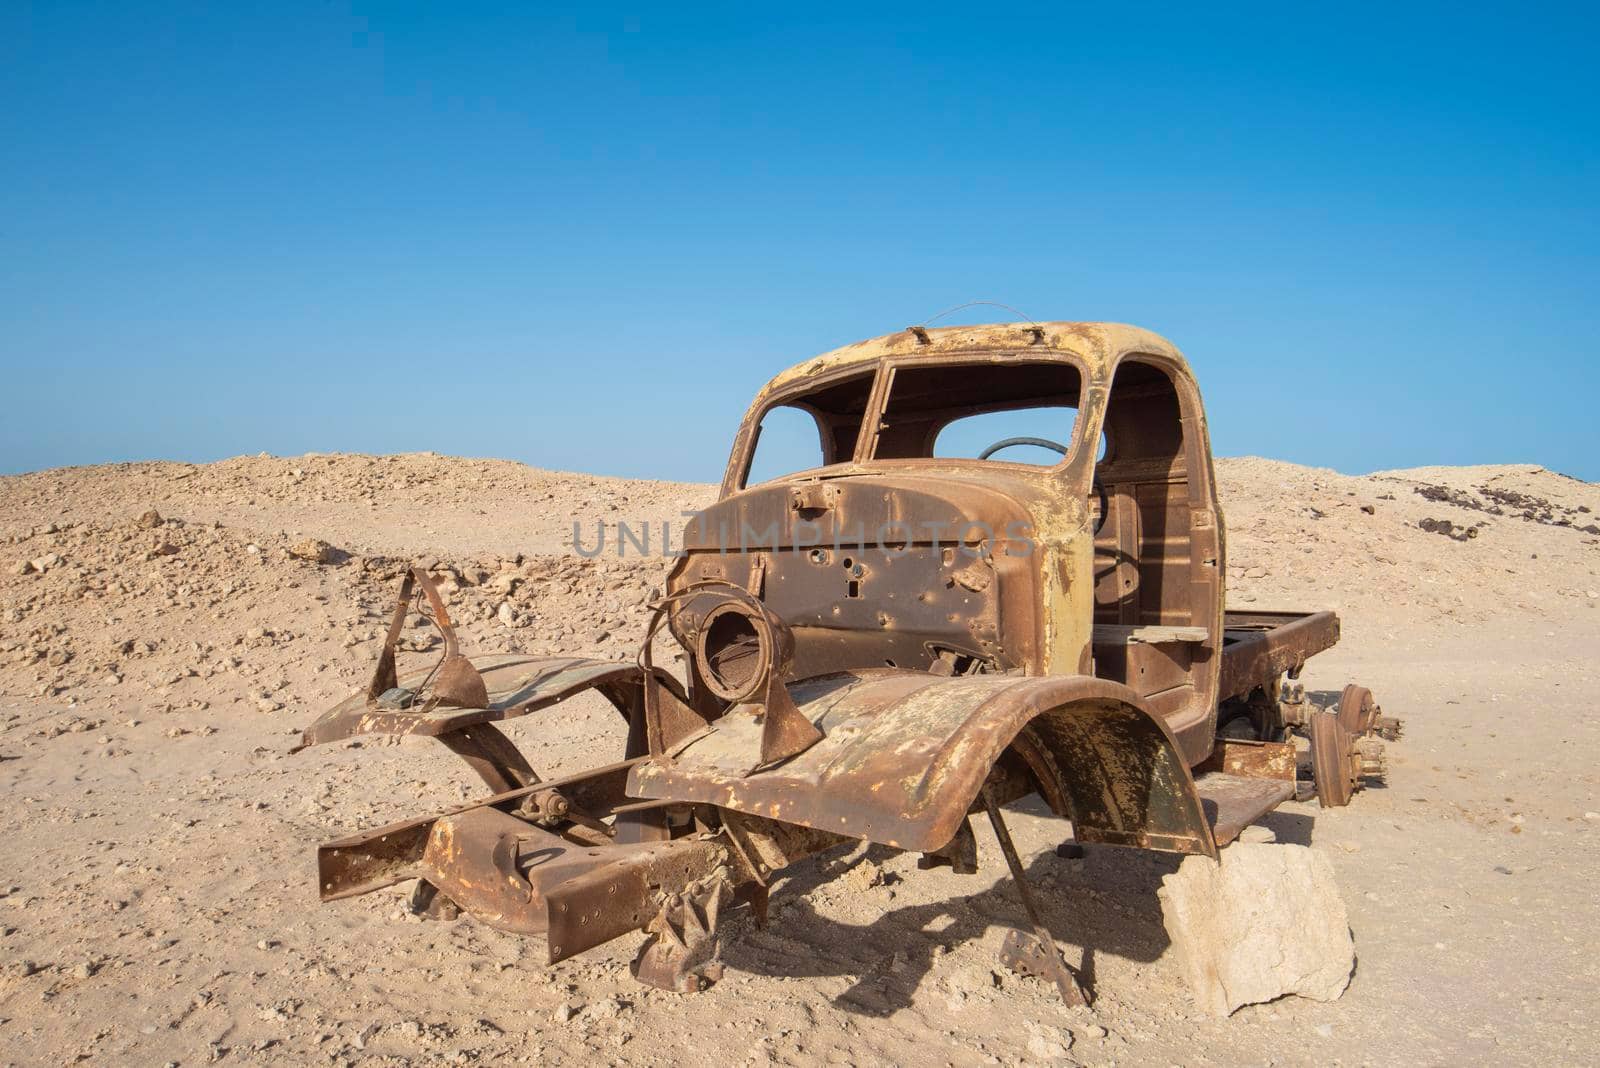 Remains of a rusty old abandoned derelict truck left in the desert to decay